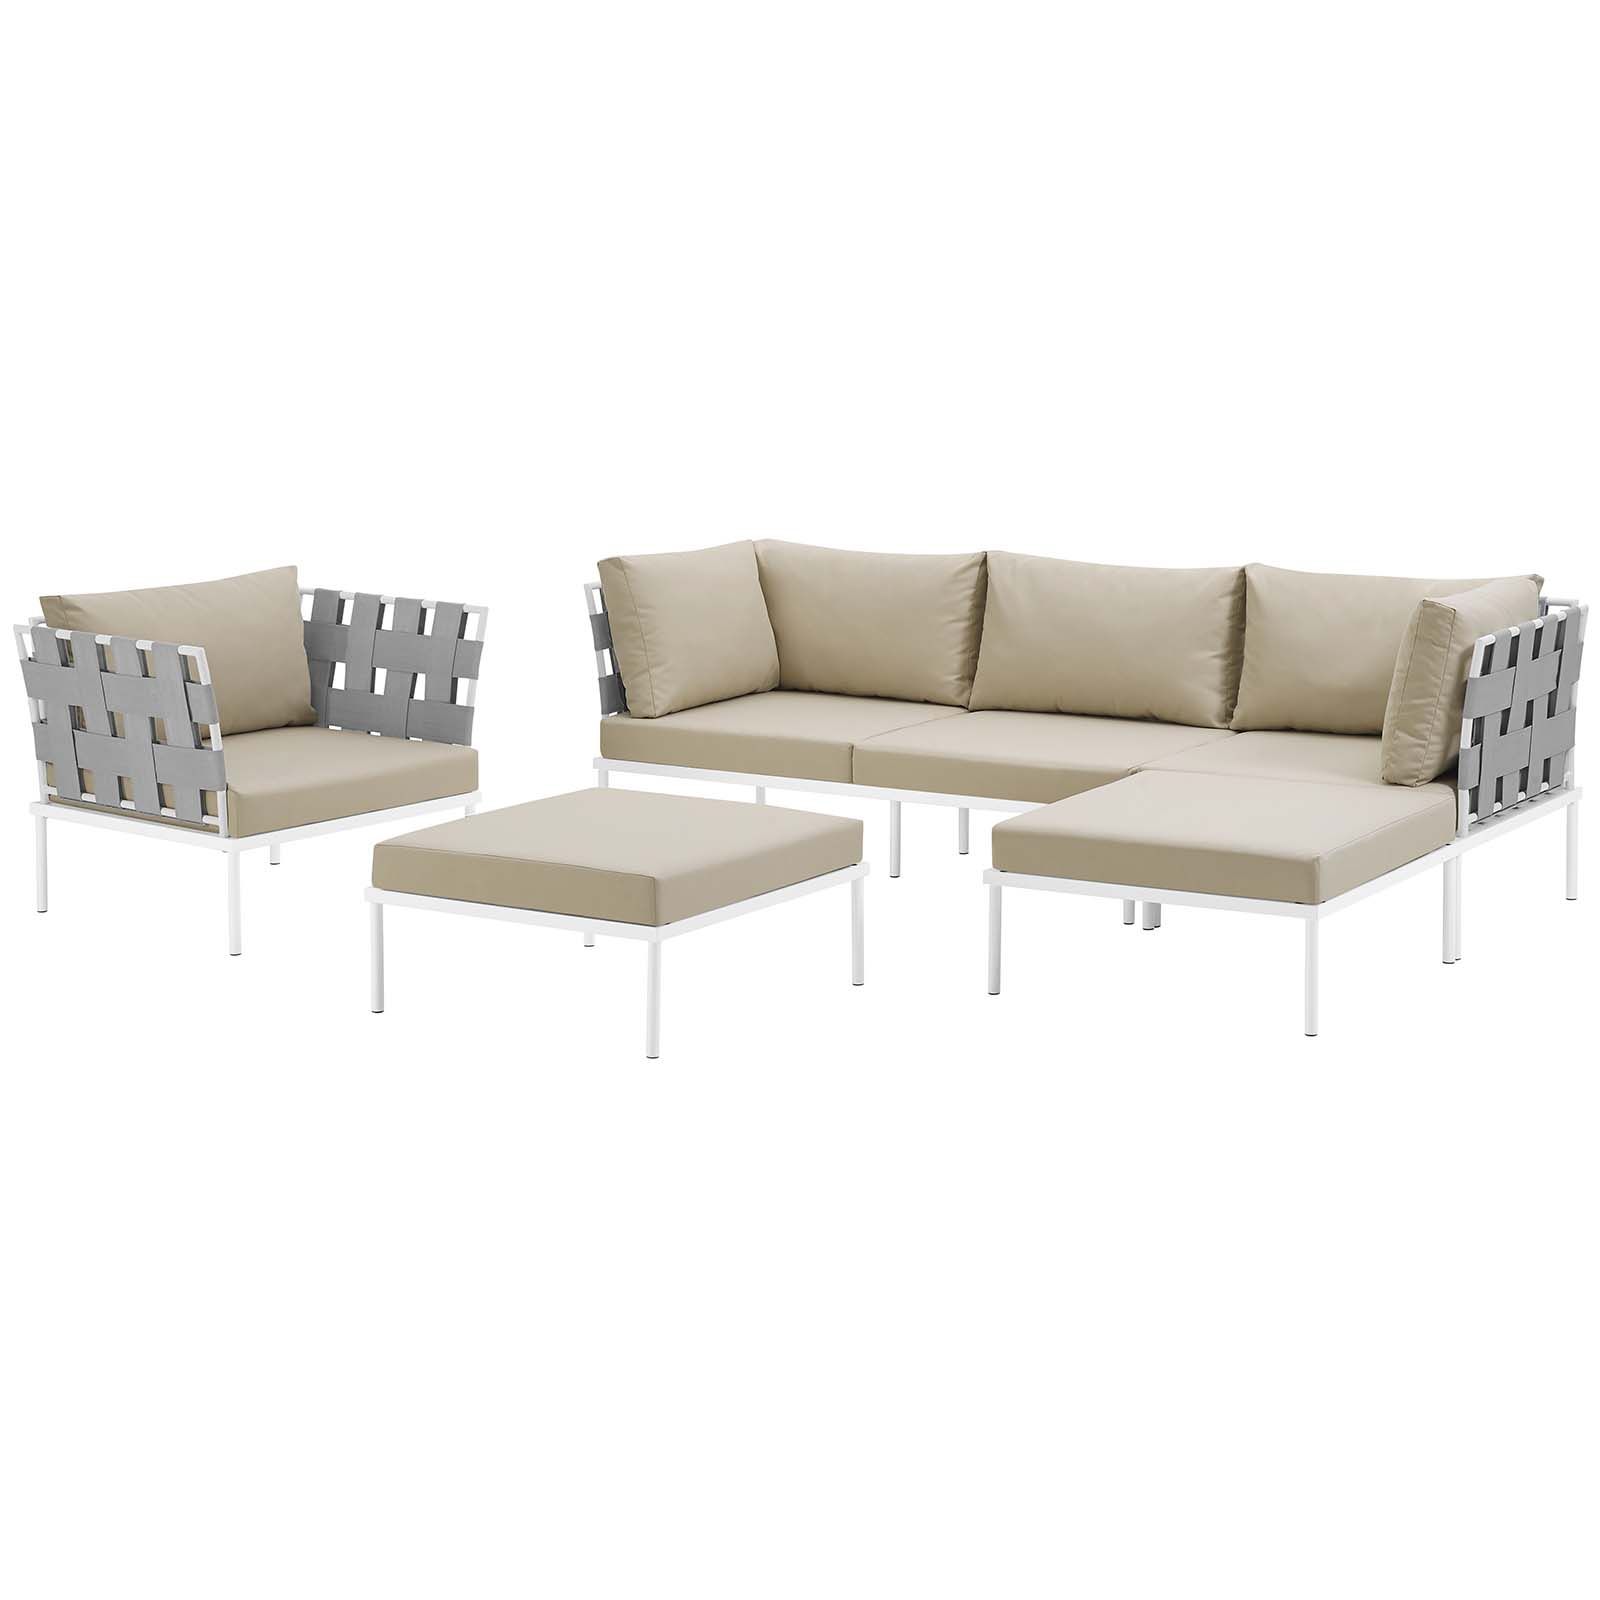 Harmony 6 Piece Outdoor Patio Aluminum Sectional Sofa Set Pertaining To 6 Piece Outdoor Sectional Sofa Patio Sets (View 4 of 15)